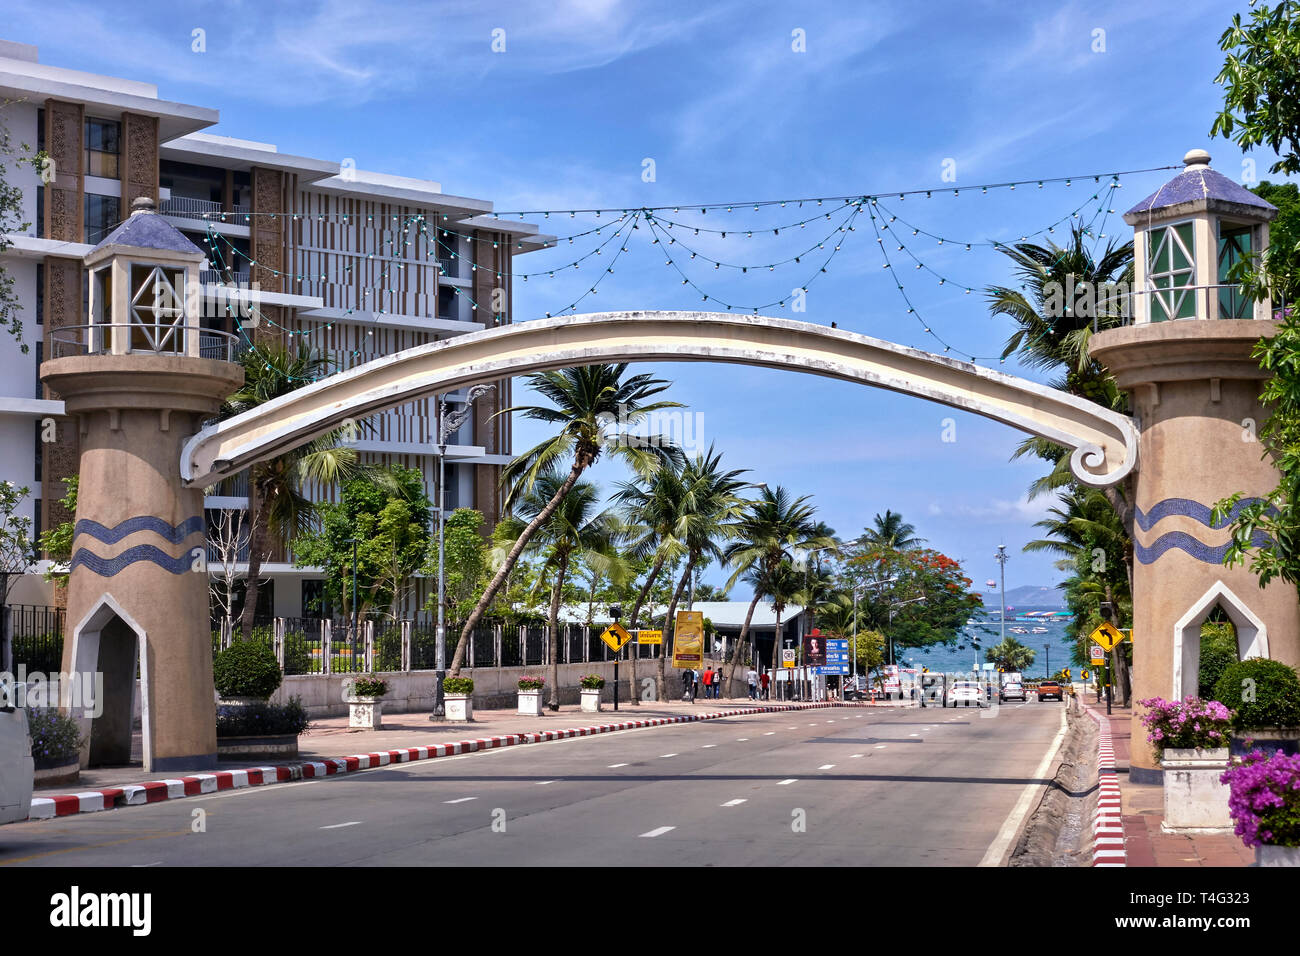 Approach road with arch entrance to Pattaya city and beach, Thailand, Southeast Asia Stock Photo